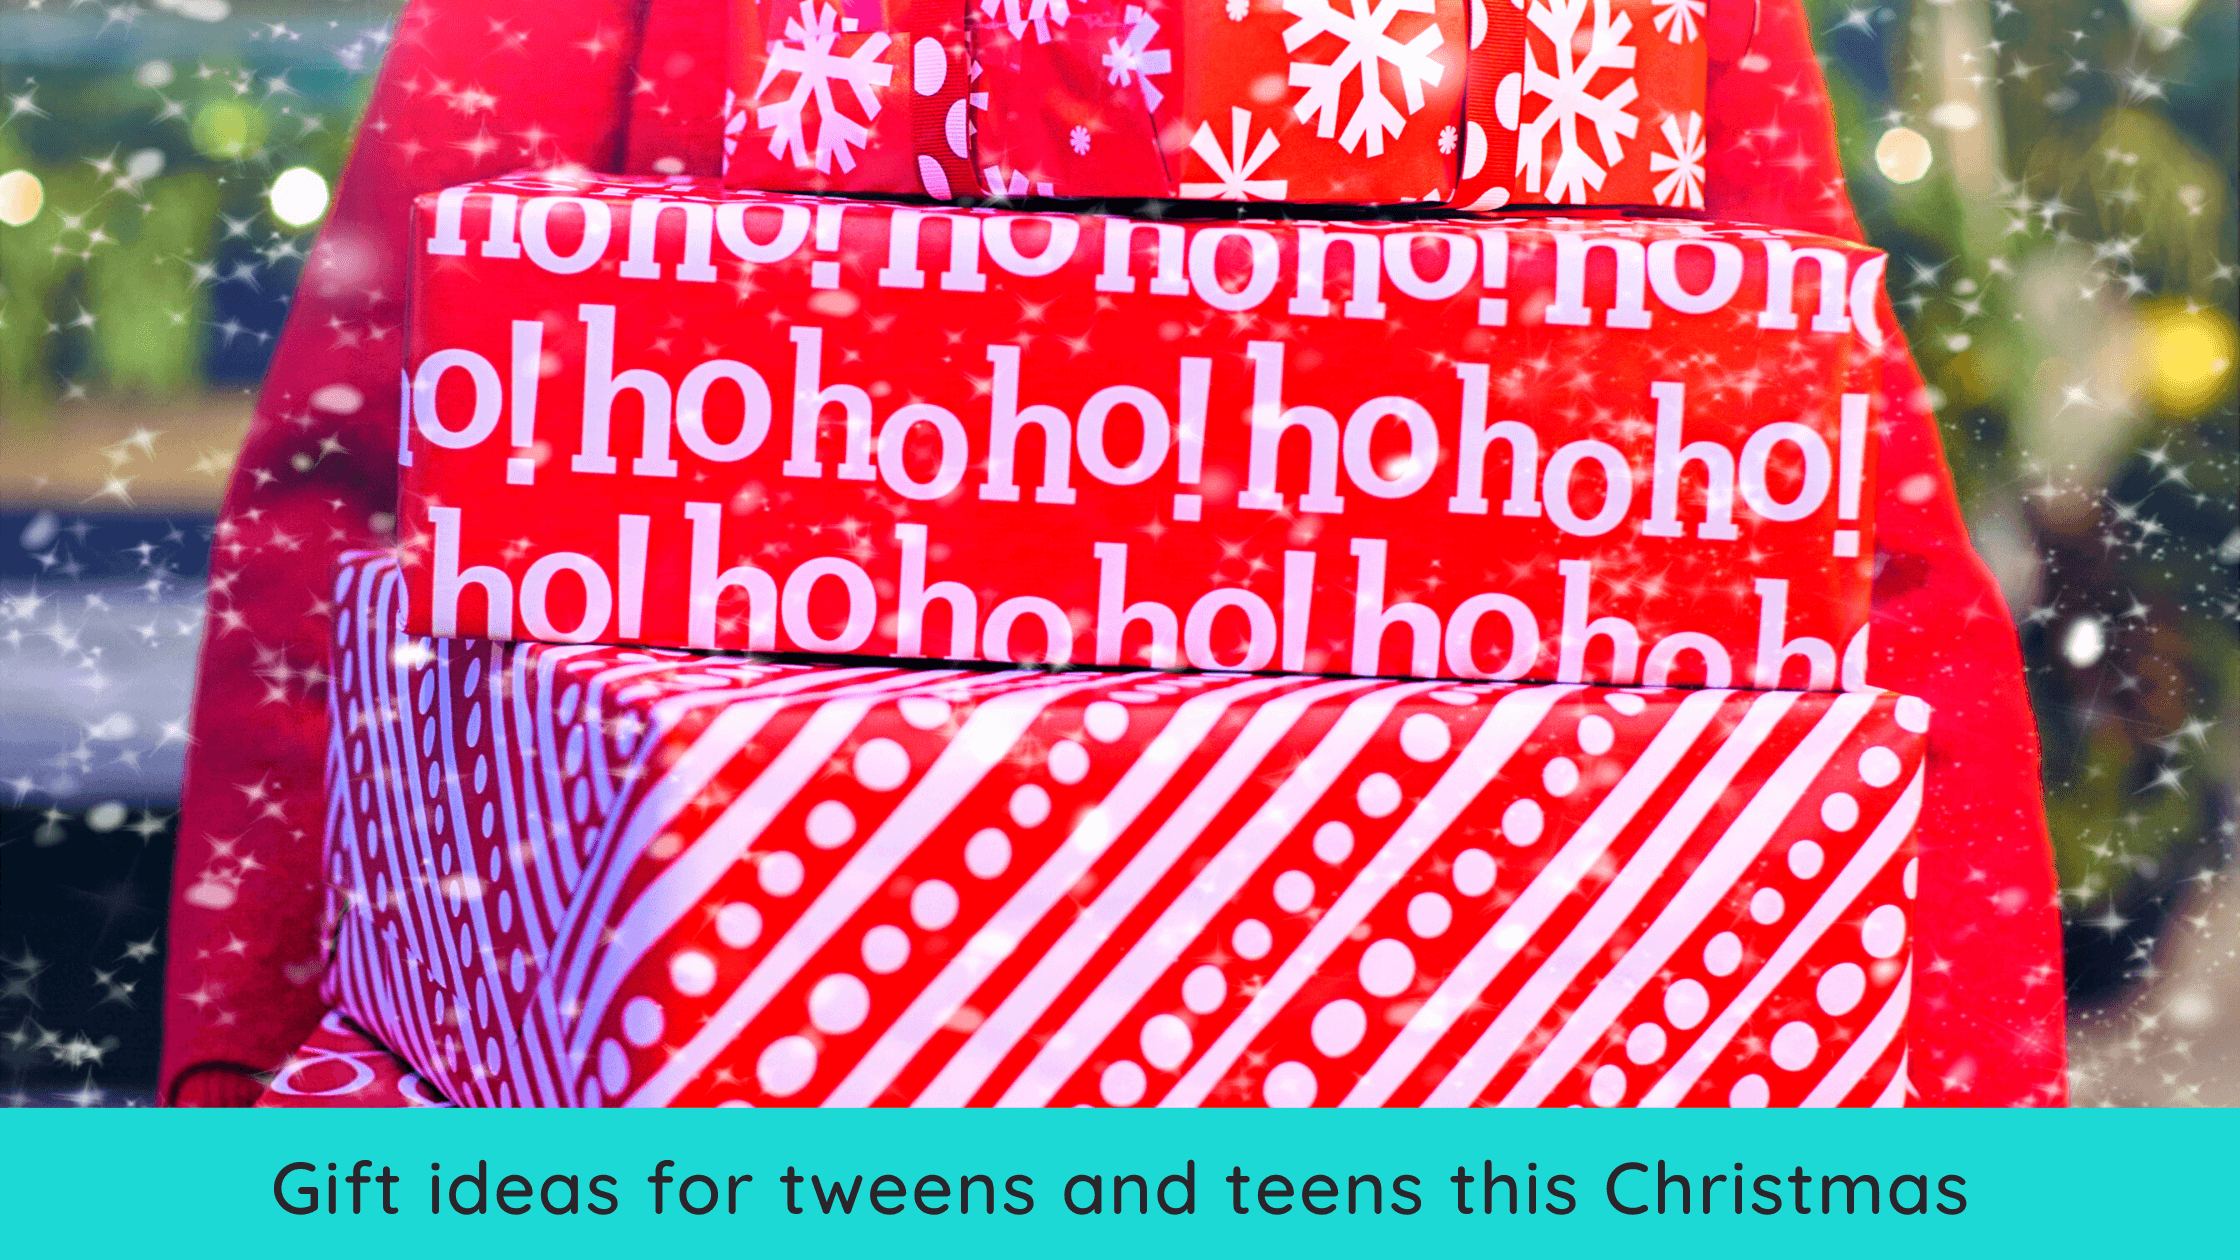 Gift ideas for tweens and teens this Christmas